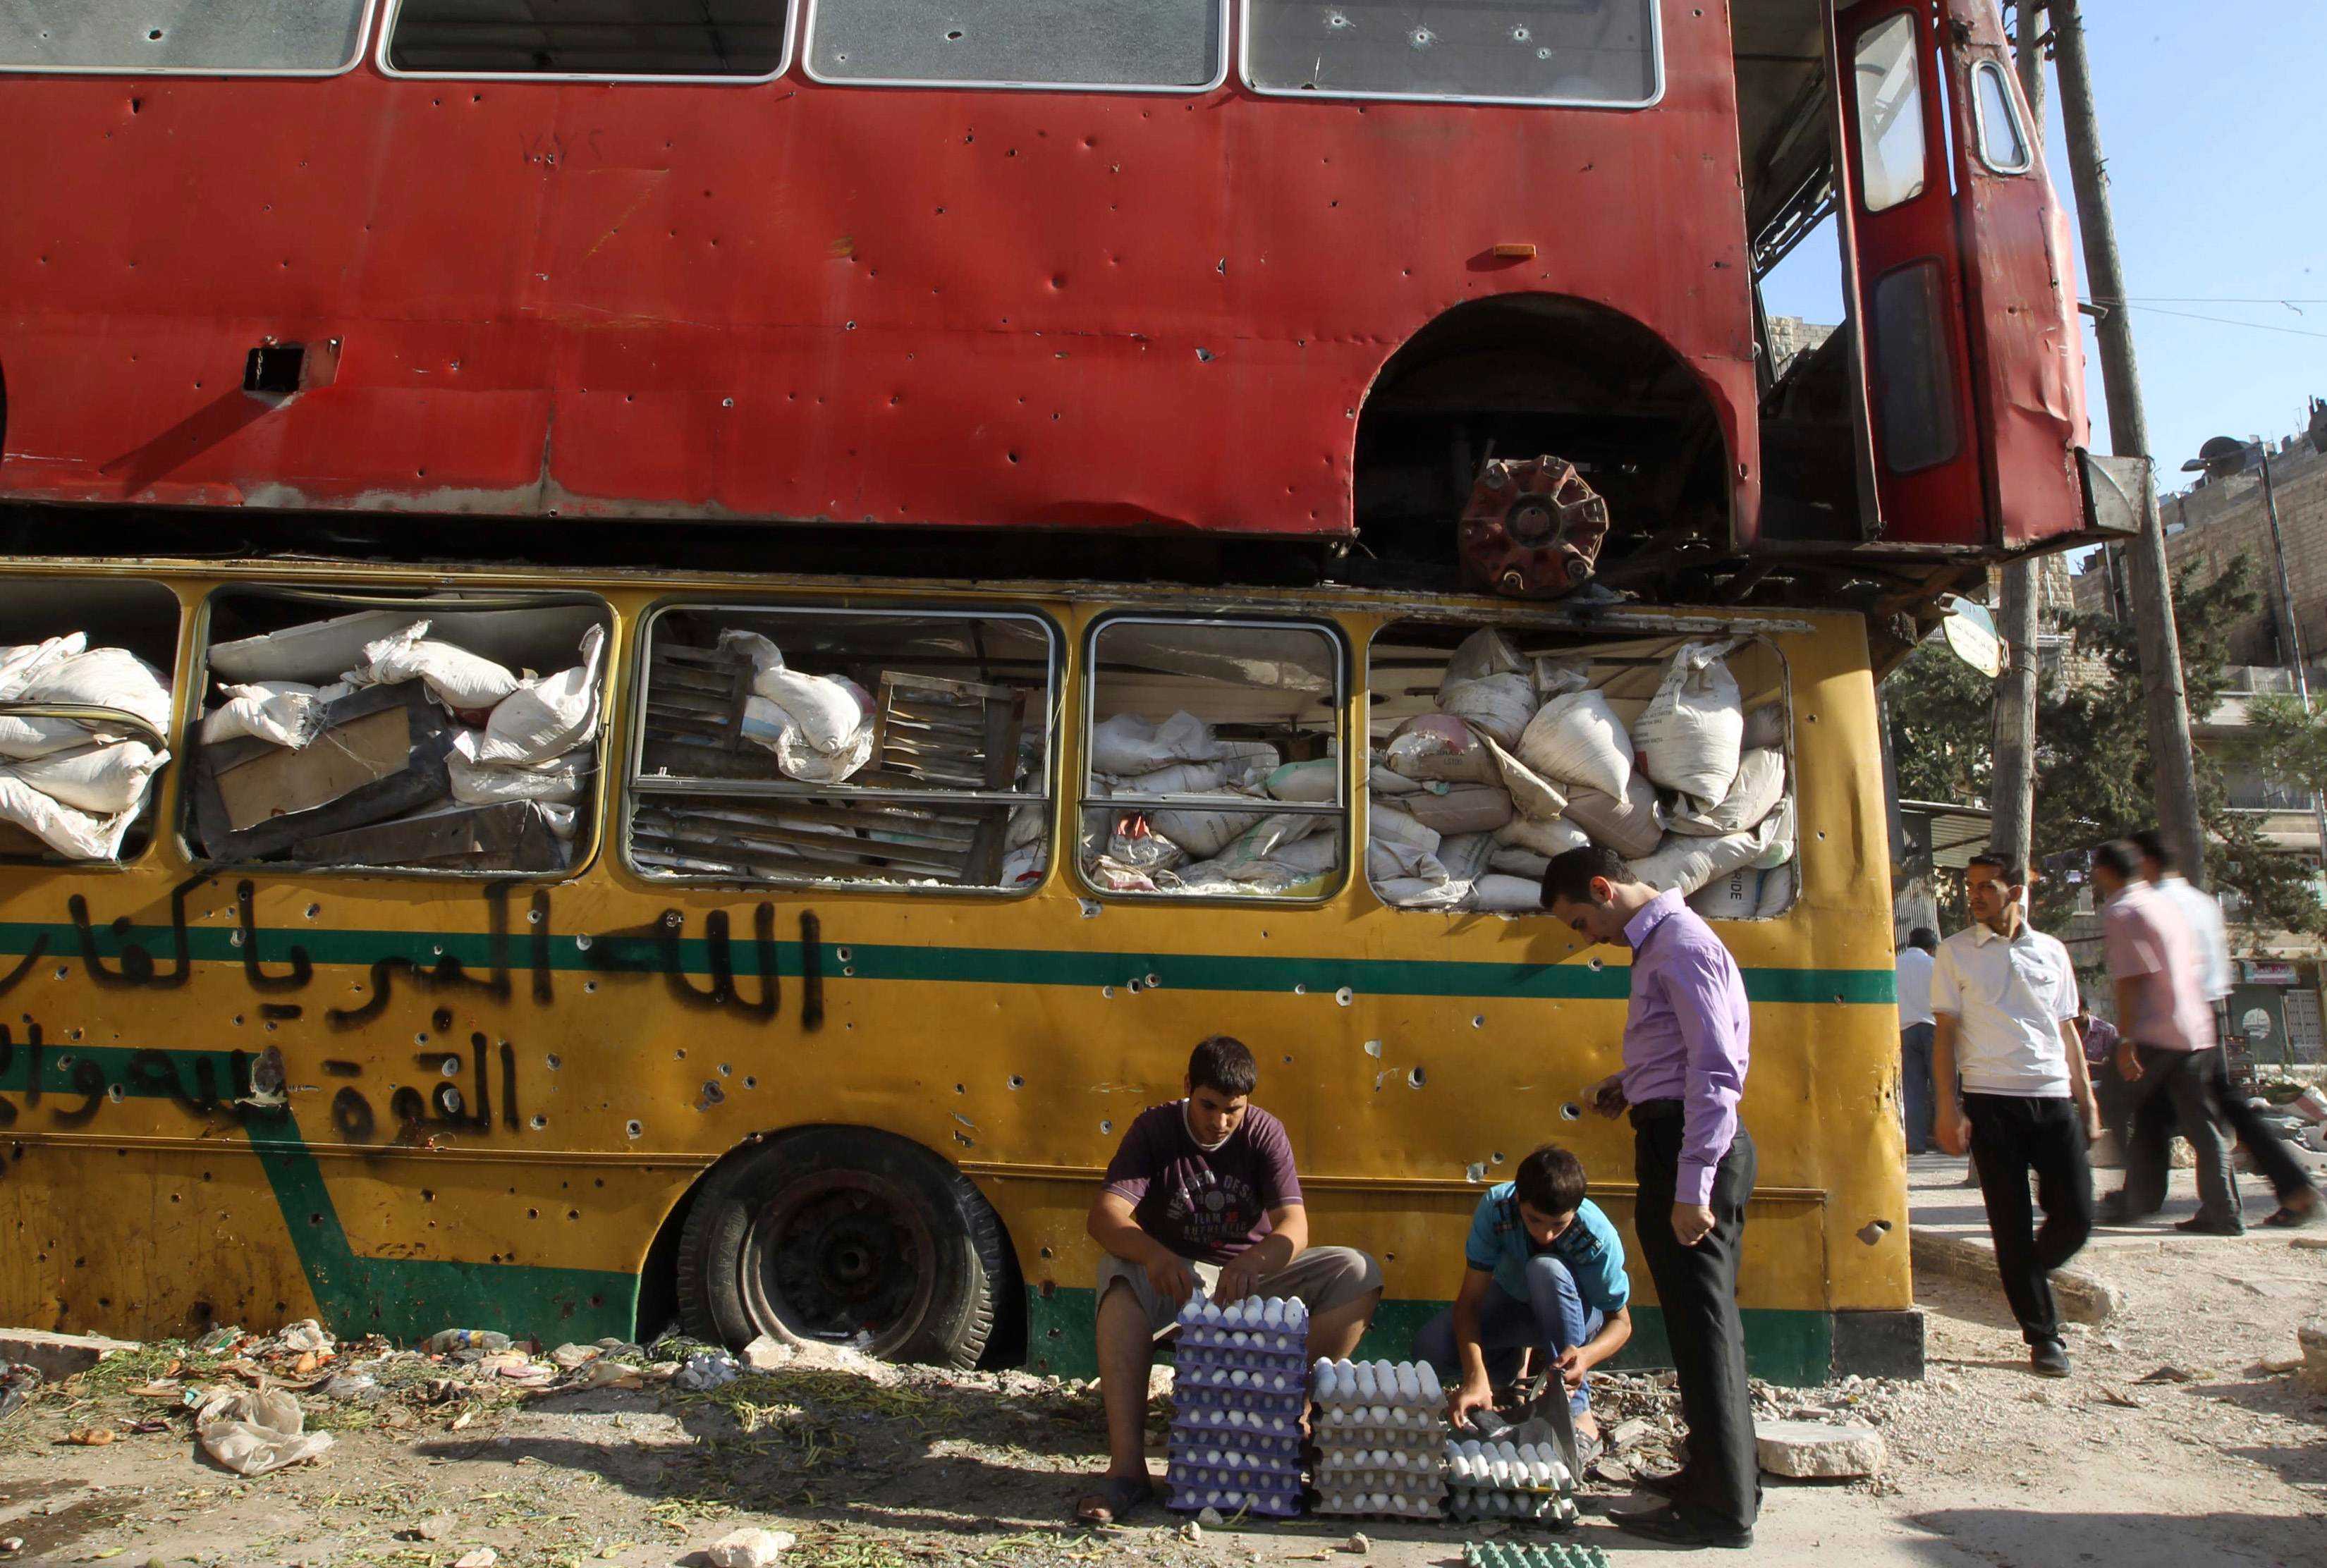 Men sell eggs in front of two buses filled with bags and cardboard.